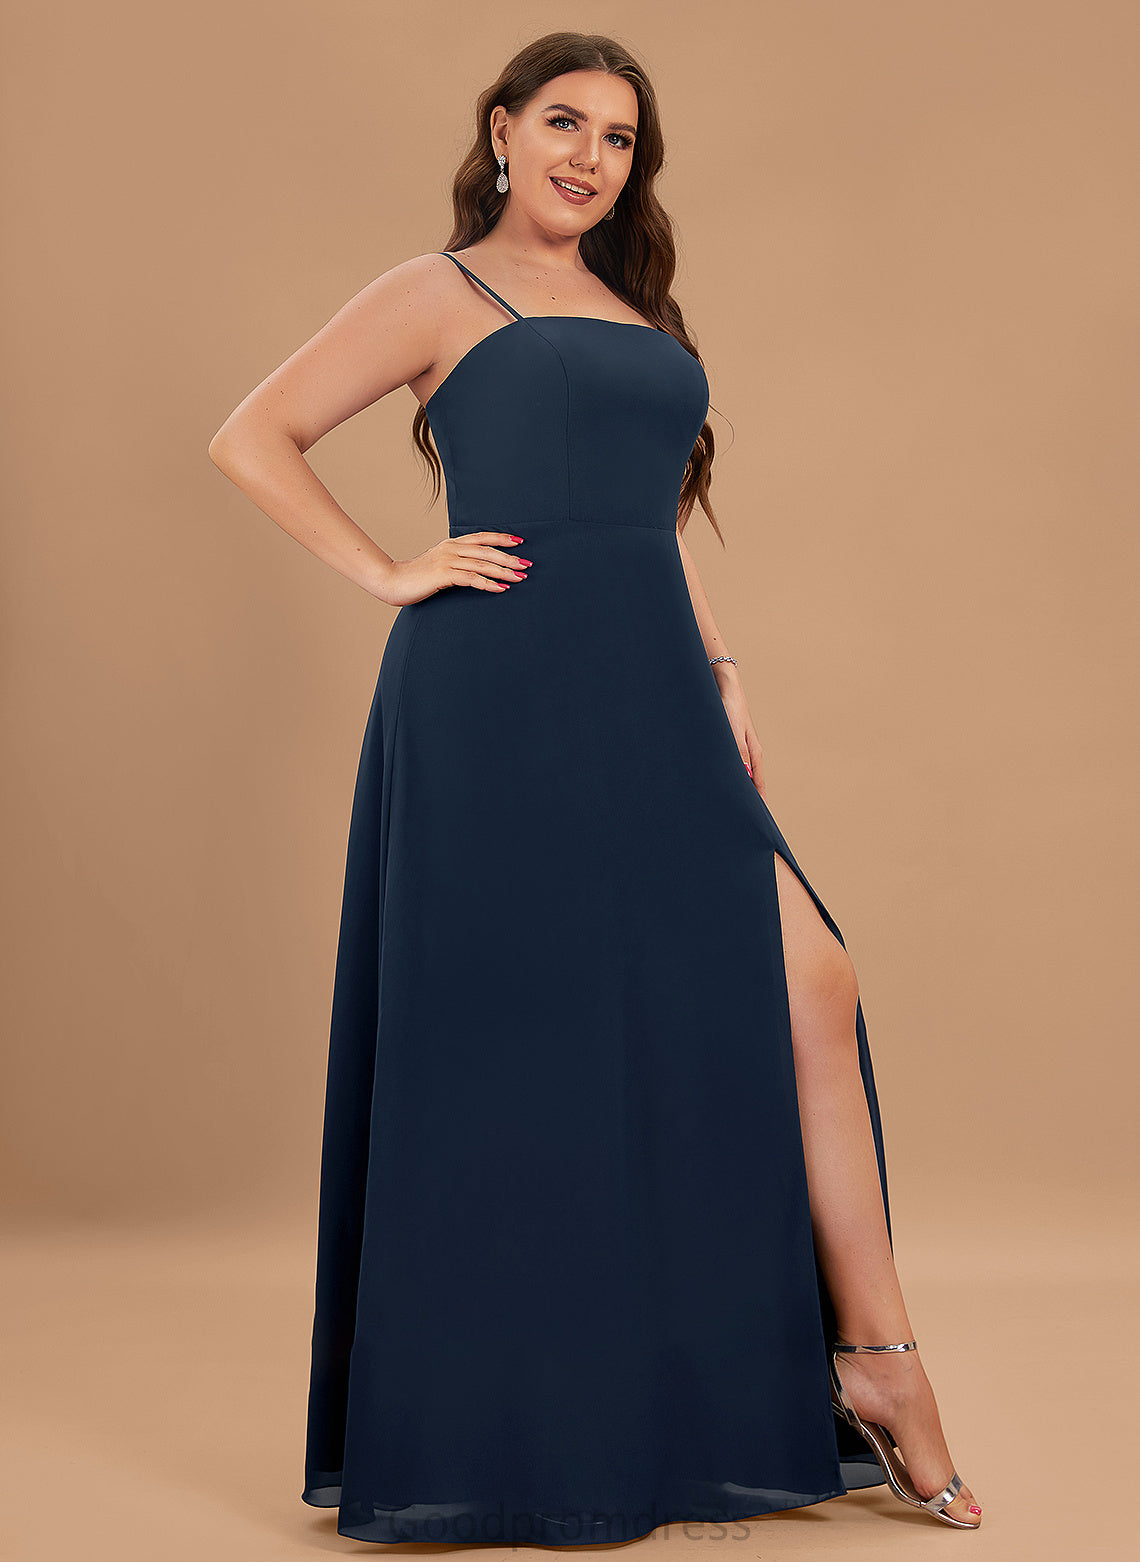 Laylah Prom Dresses Neckline Floor-Length A-Line With Square Split Chiffon Front